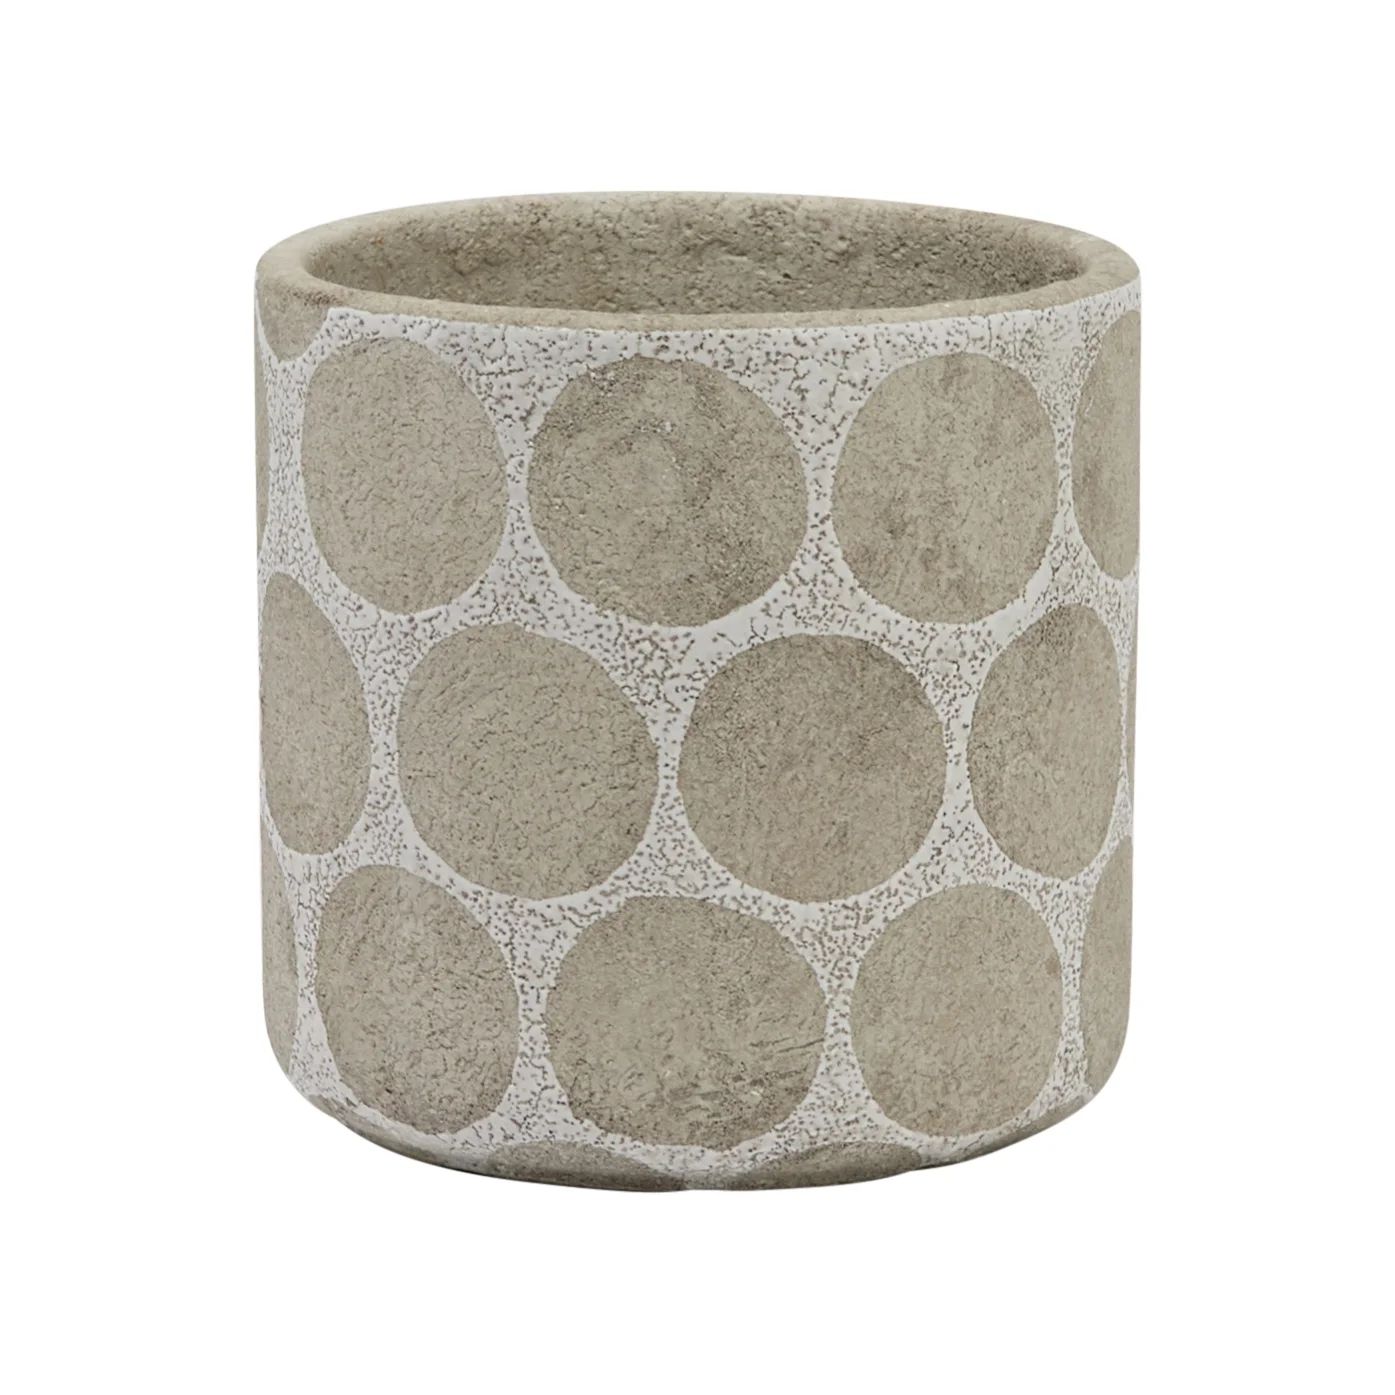 Creative Co-Op Round Terra-cotta Planter with Wax Relief Dots, White and Cement | Walmart (US)